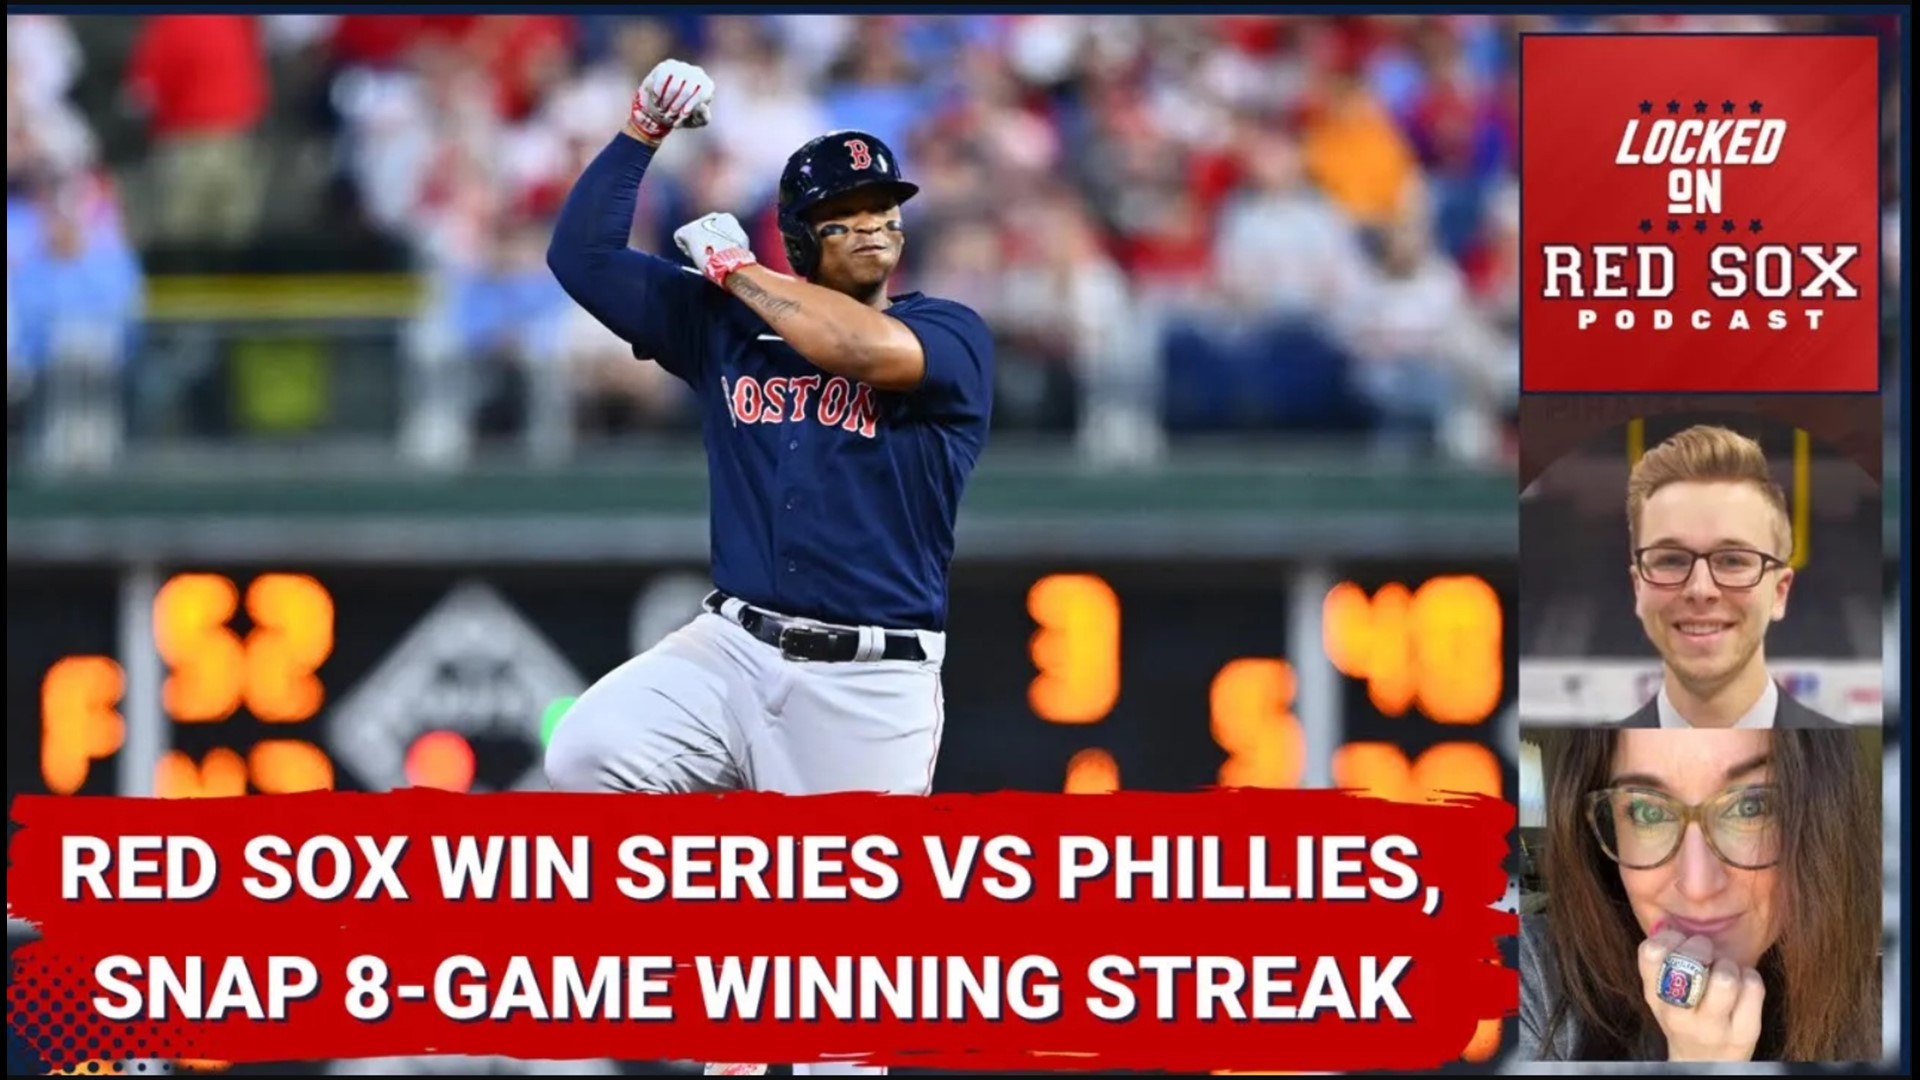 The Red Sox were steaming hot after sweeping the Blue Jays in 4 games and won the first 2 games against the Phillies to extend their 8-game winning streak.